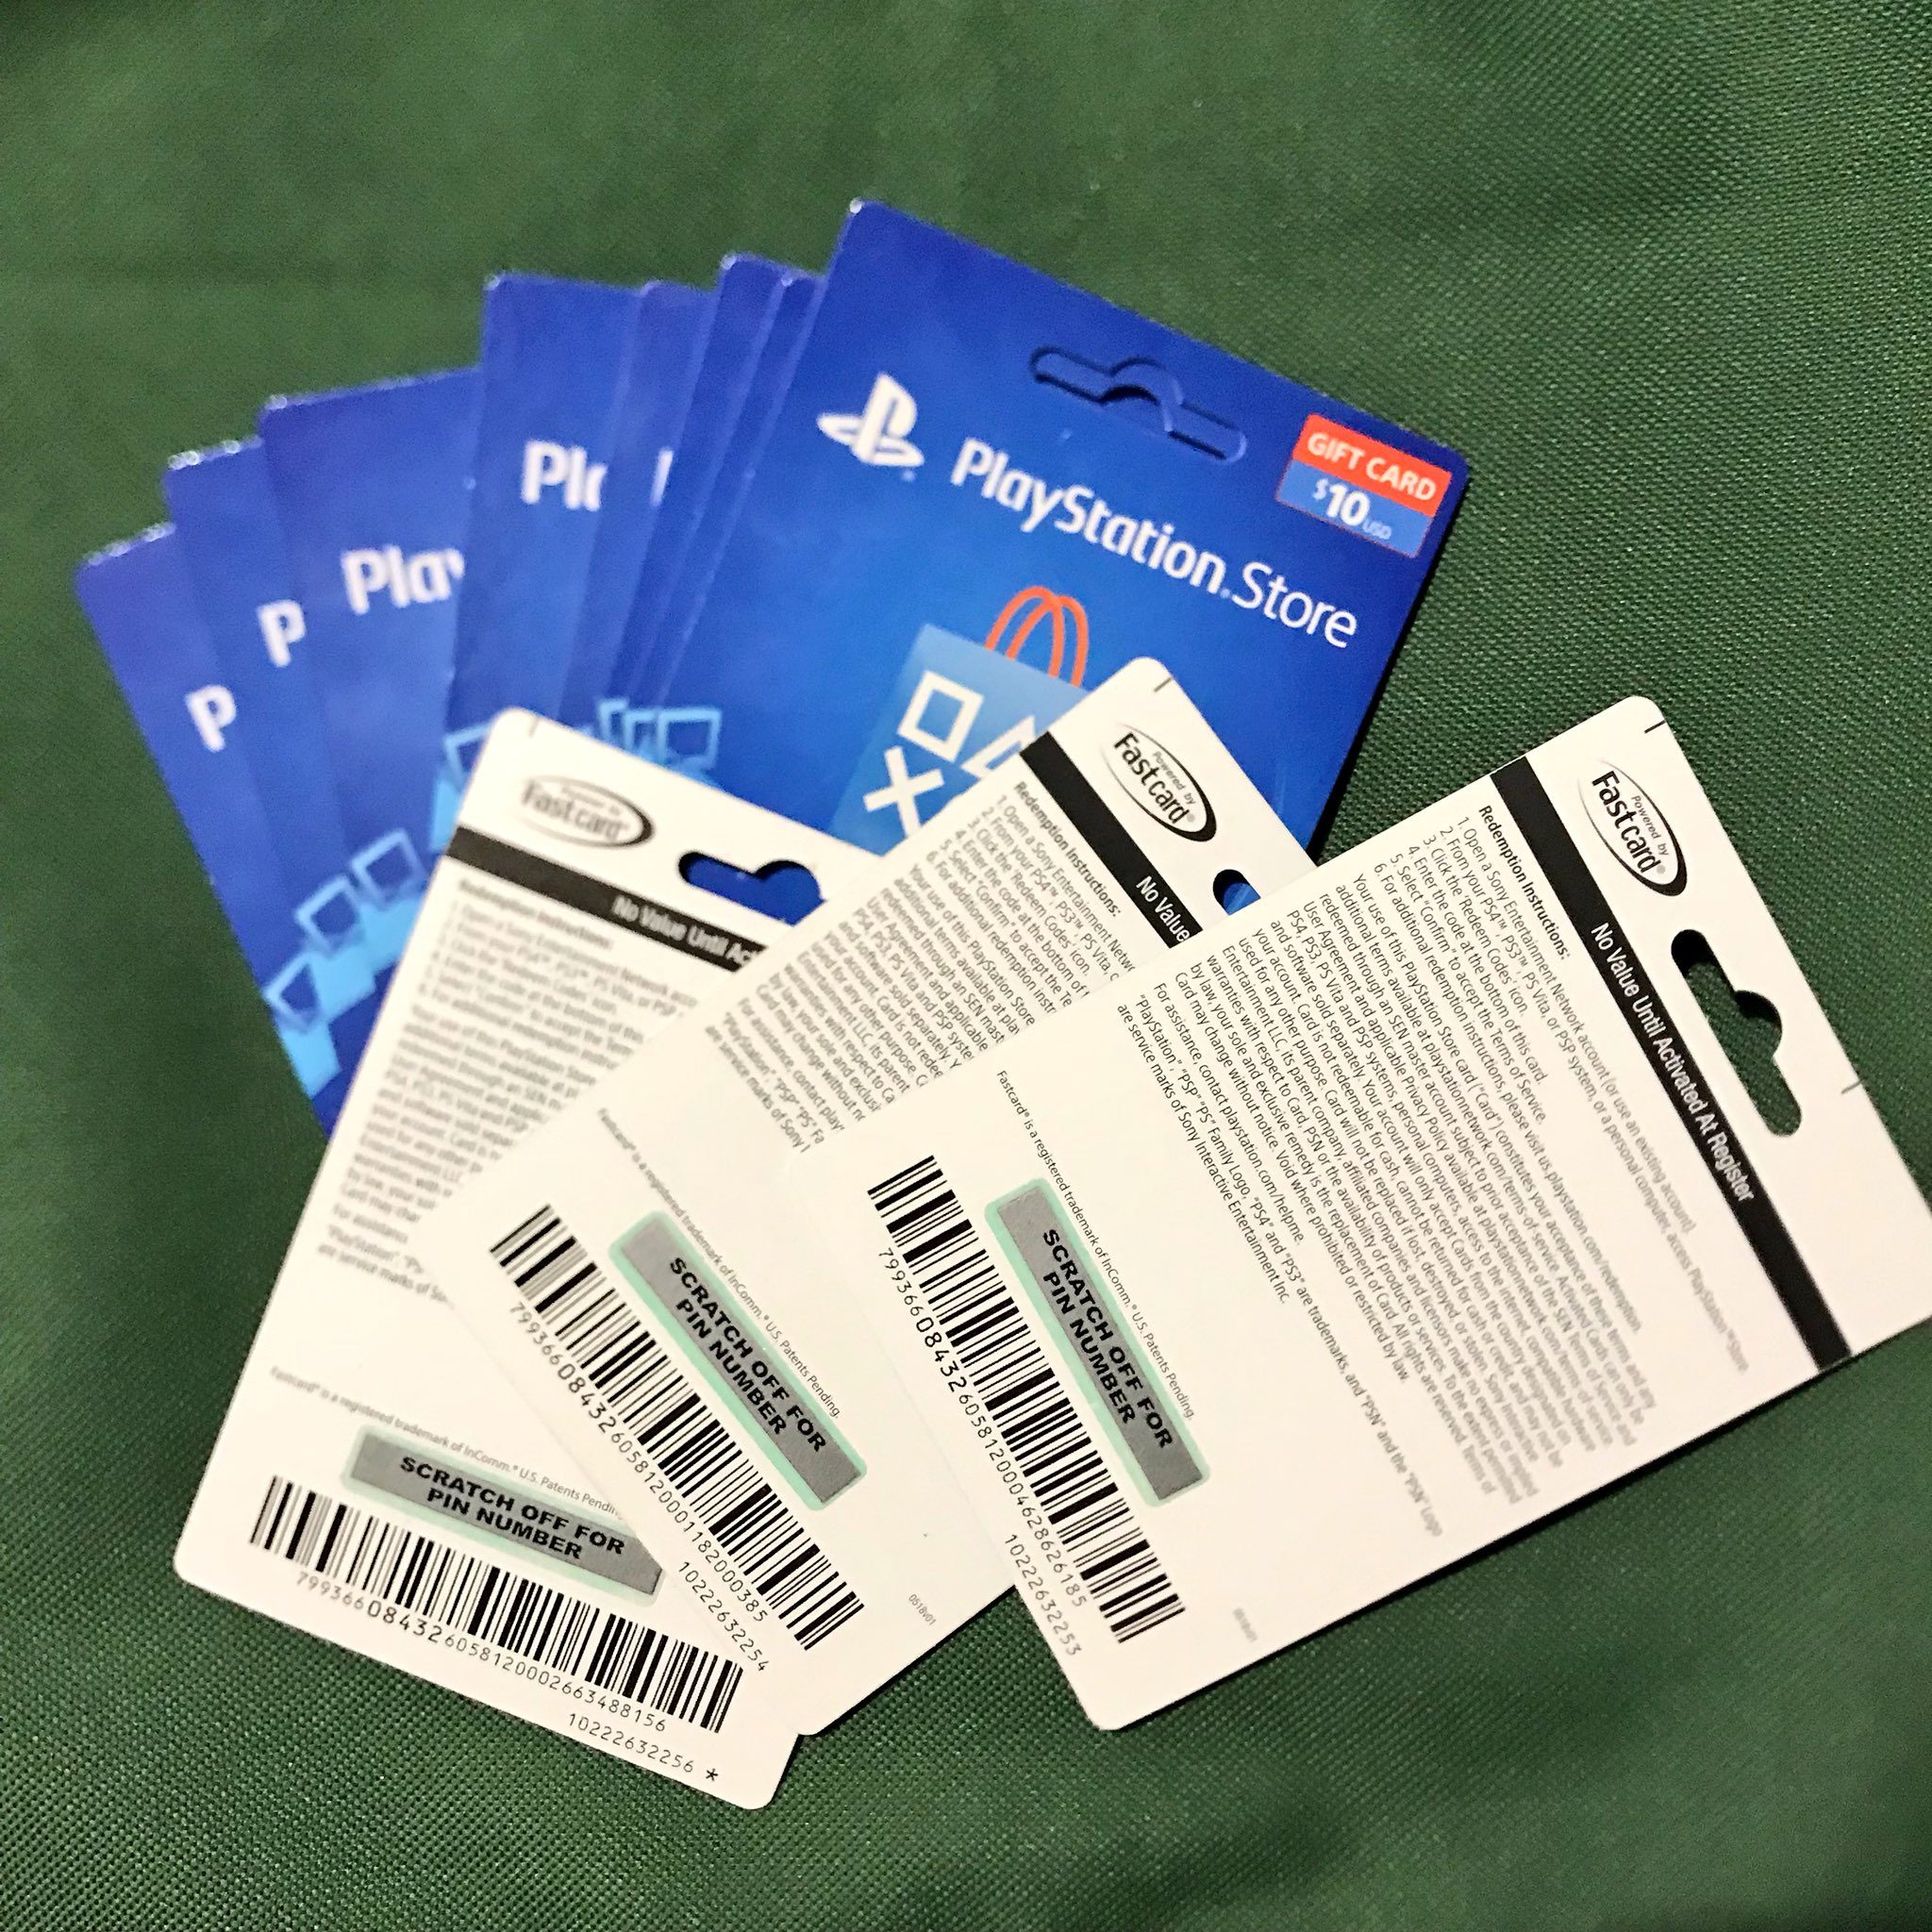 tack beton Hejse bagdar on Twitter: "Giving away a $10 PS4 GIFT CARD Like 💙 Retweet🔷  Follow🔵 WINNER WILL BE RANDOMLY PICKED AND ANNOUNCED TOMORROW NIGHT!  #fortnite #giveaway #giftcard #playstation #vbucksgiveaway #vbucks  https://t.co/4zDveCrLg6" / Twitter